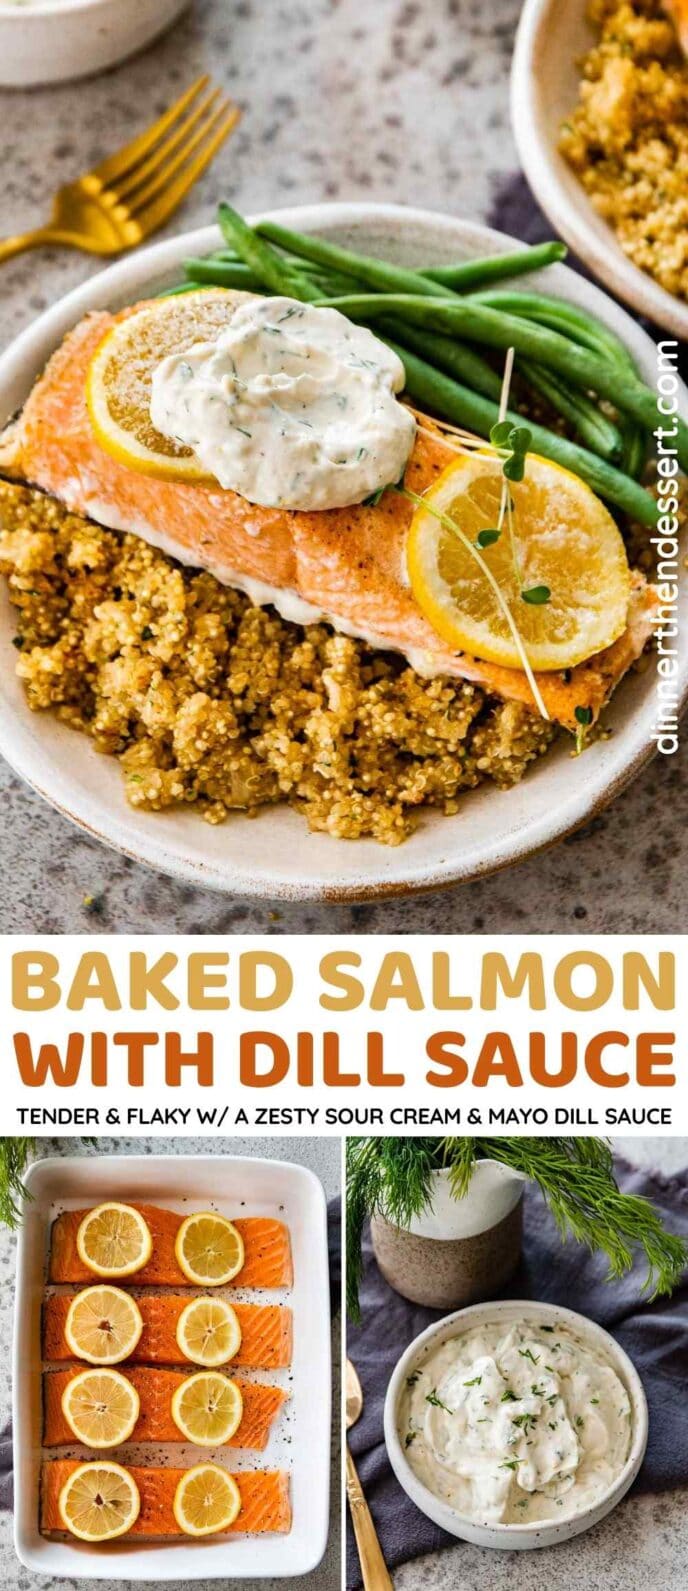 Baked Salmon with Dill Sauce Collage